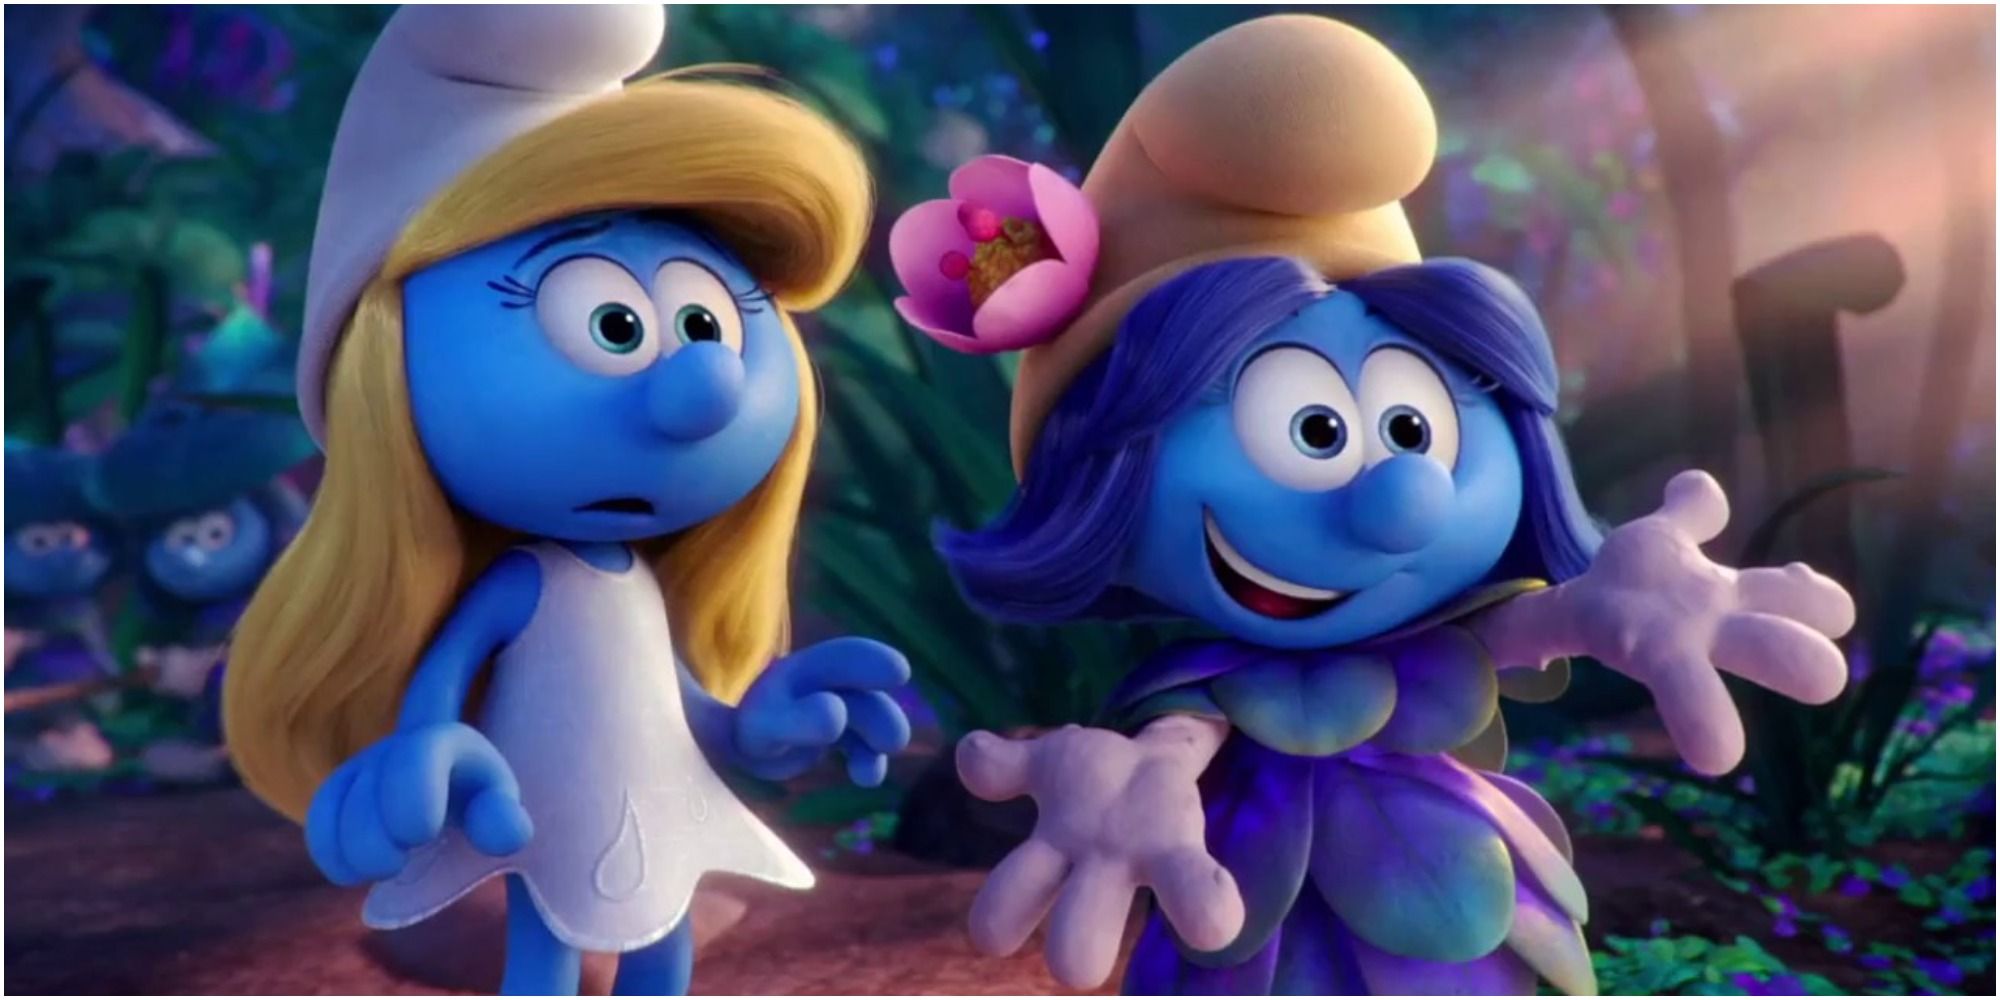 A screenshot of Ellie Kemper as SmurfBlossom with Smurfette in Smurfs: The Lost Village